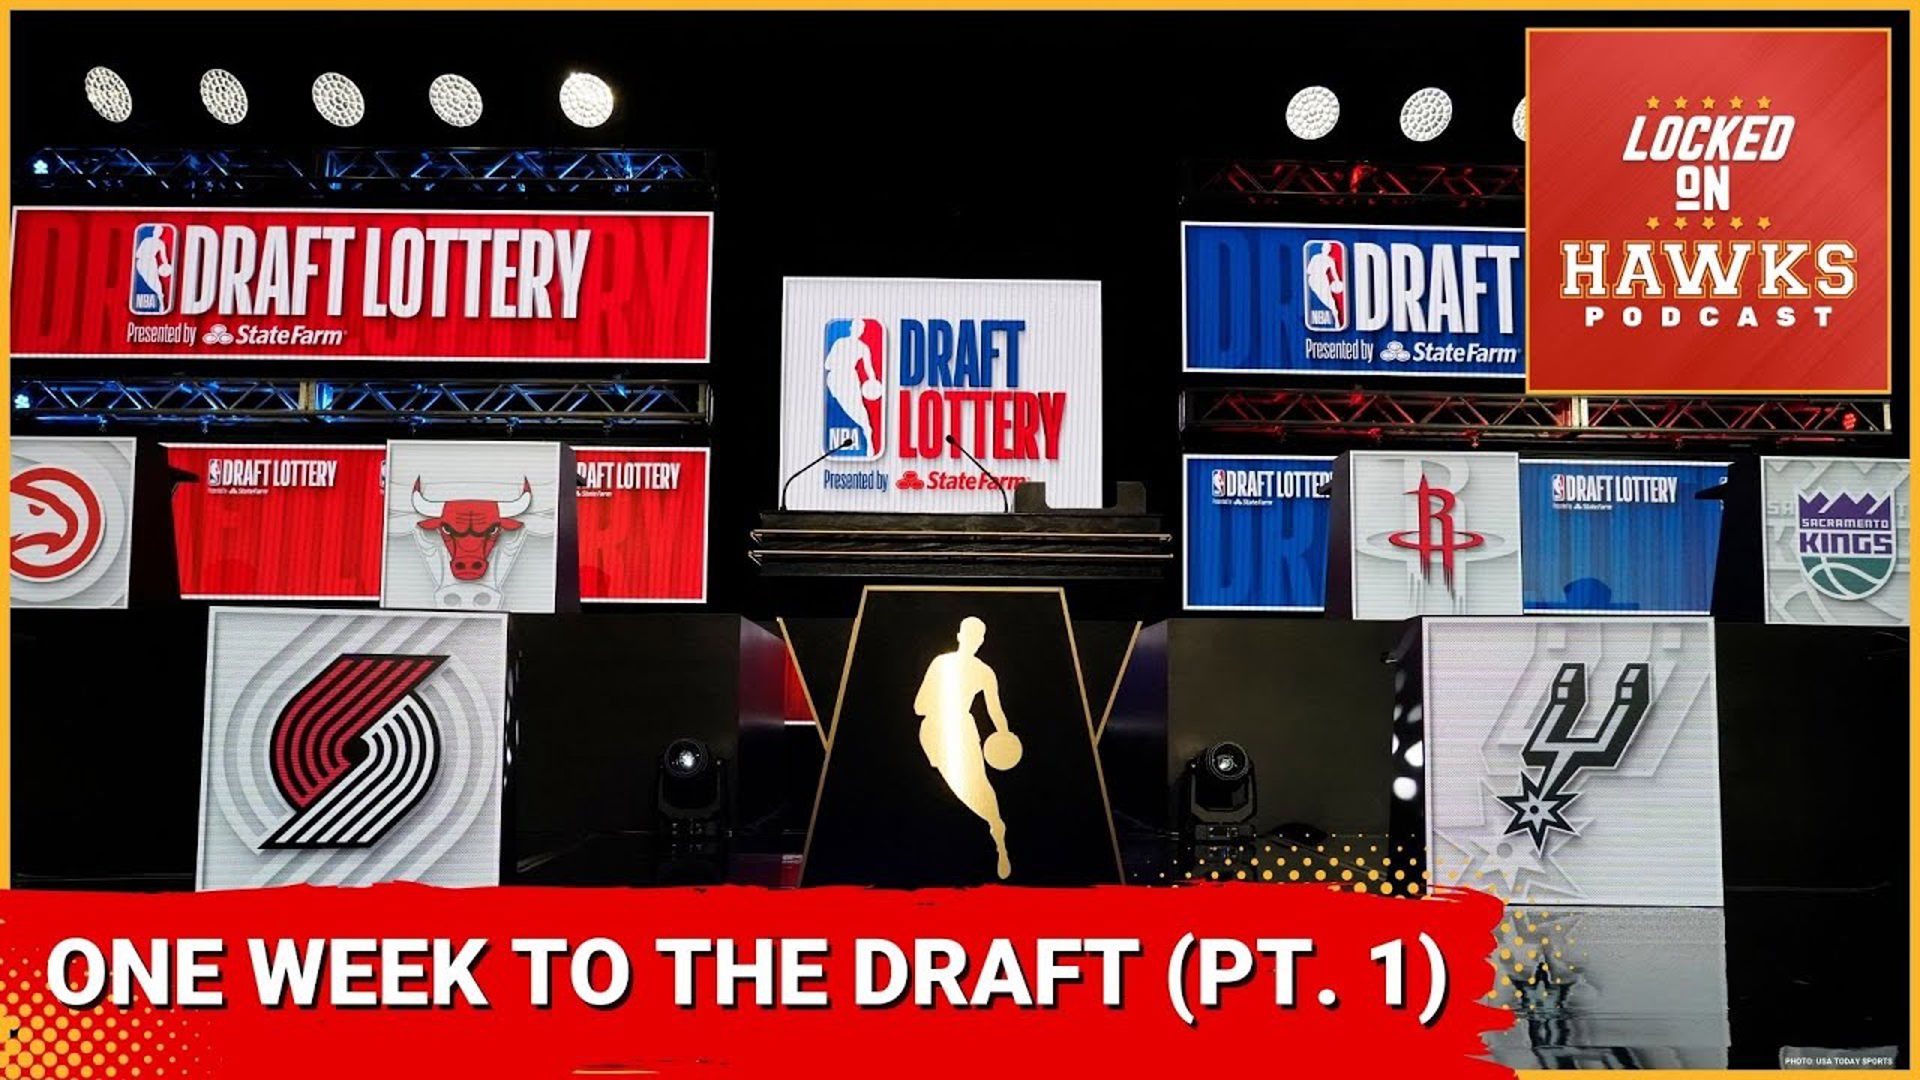 the latest buzz on the No. 1 pick. Then, the conversation with Ricky O'Donnell focuses on the Atlanta Hawks and the 2024 NBA Draft